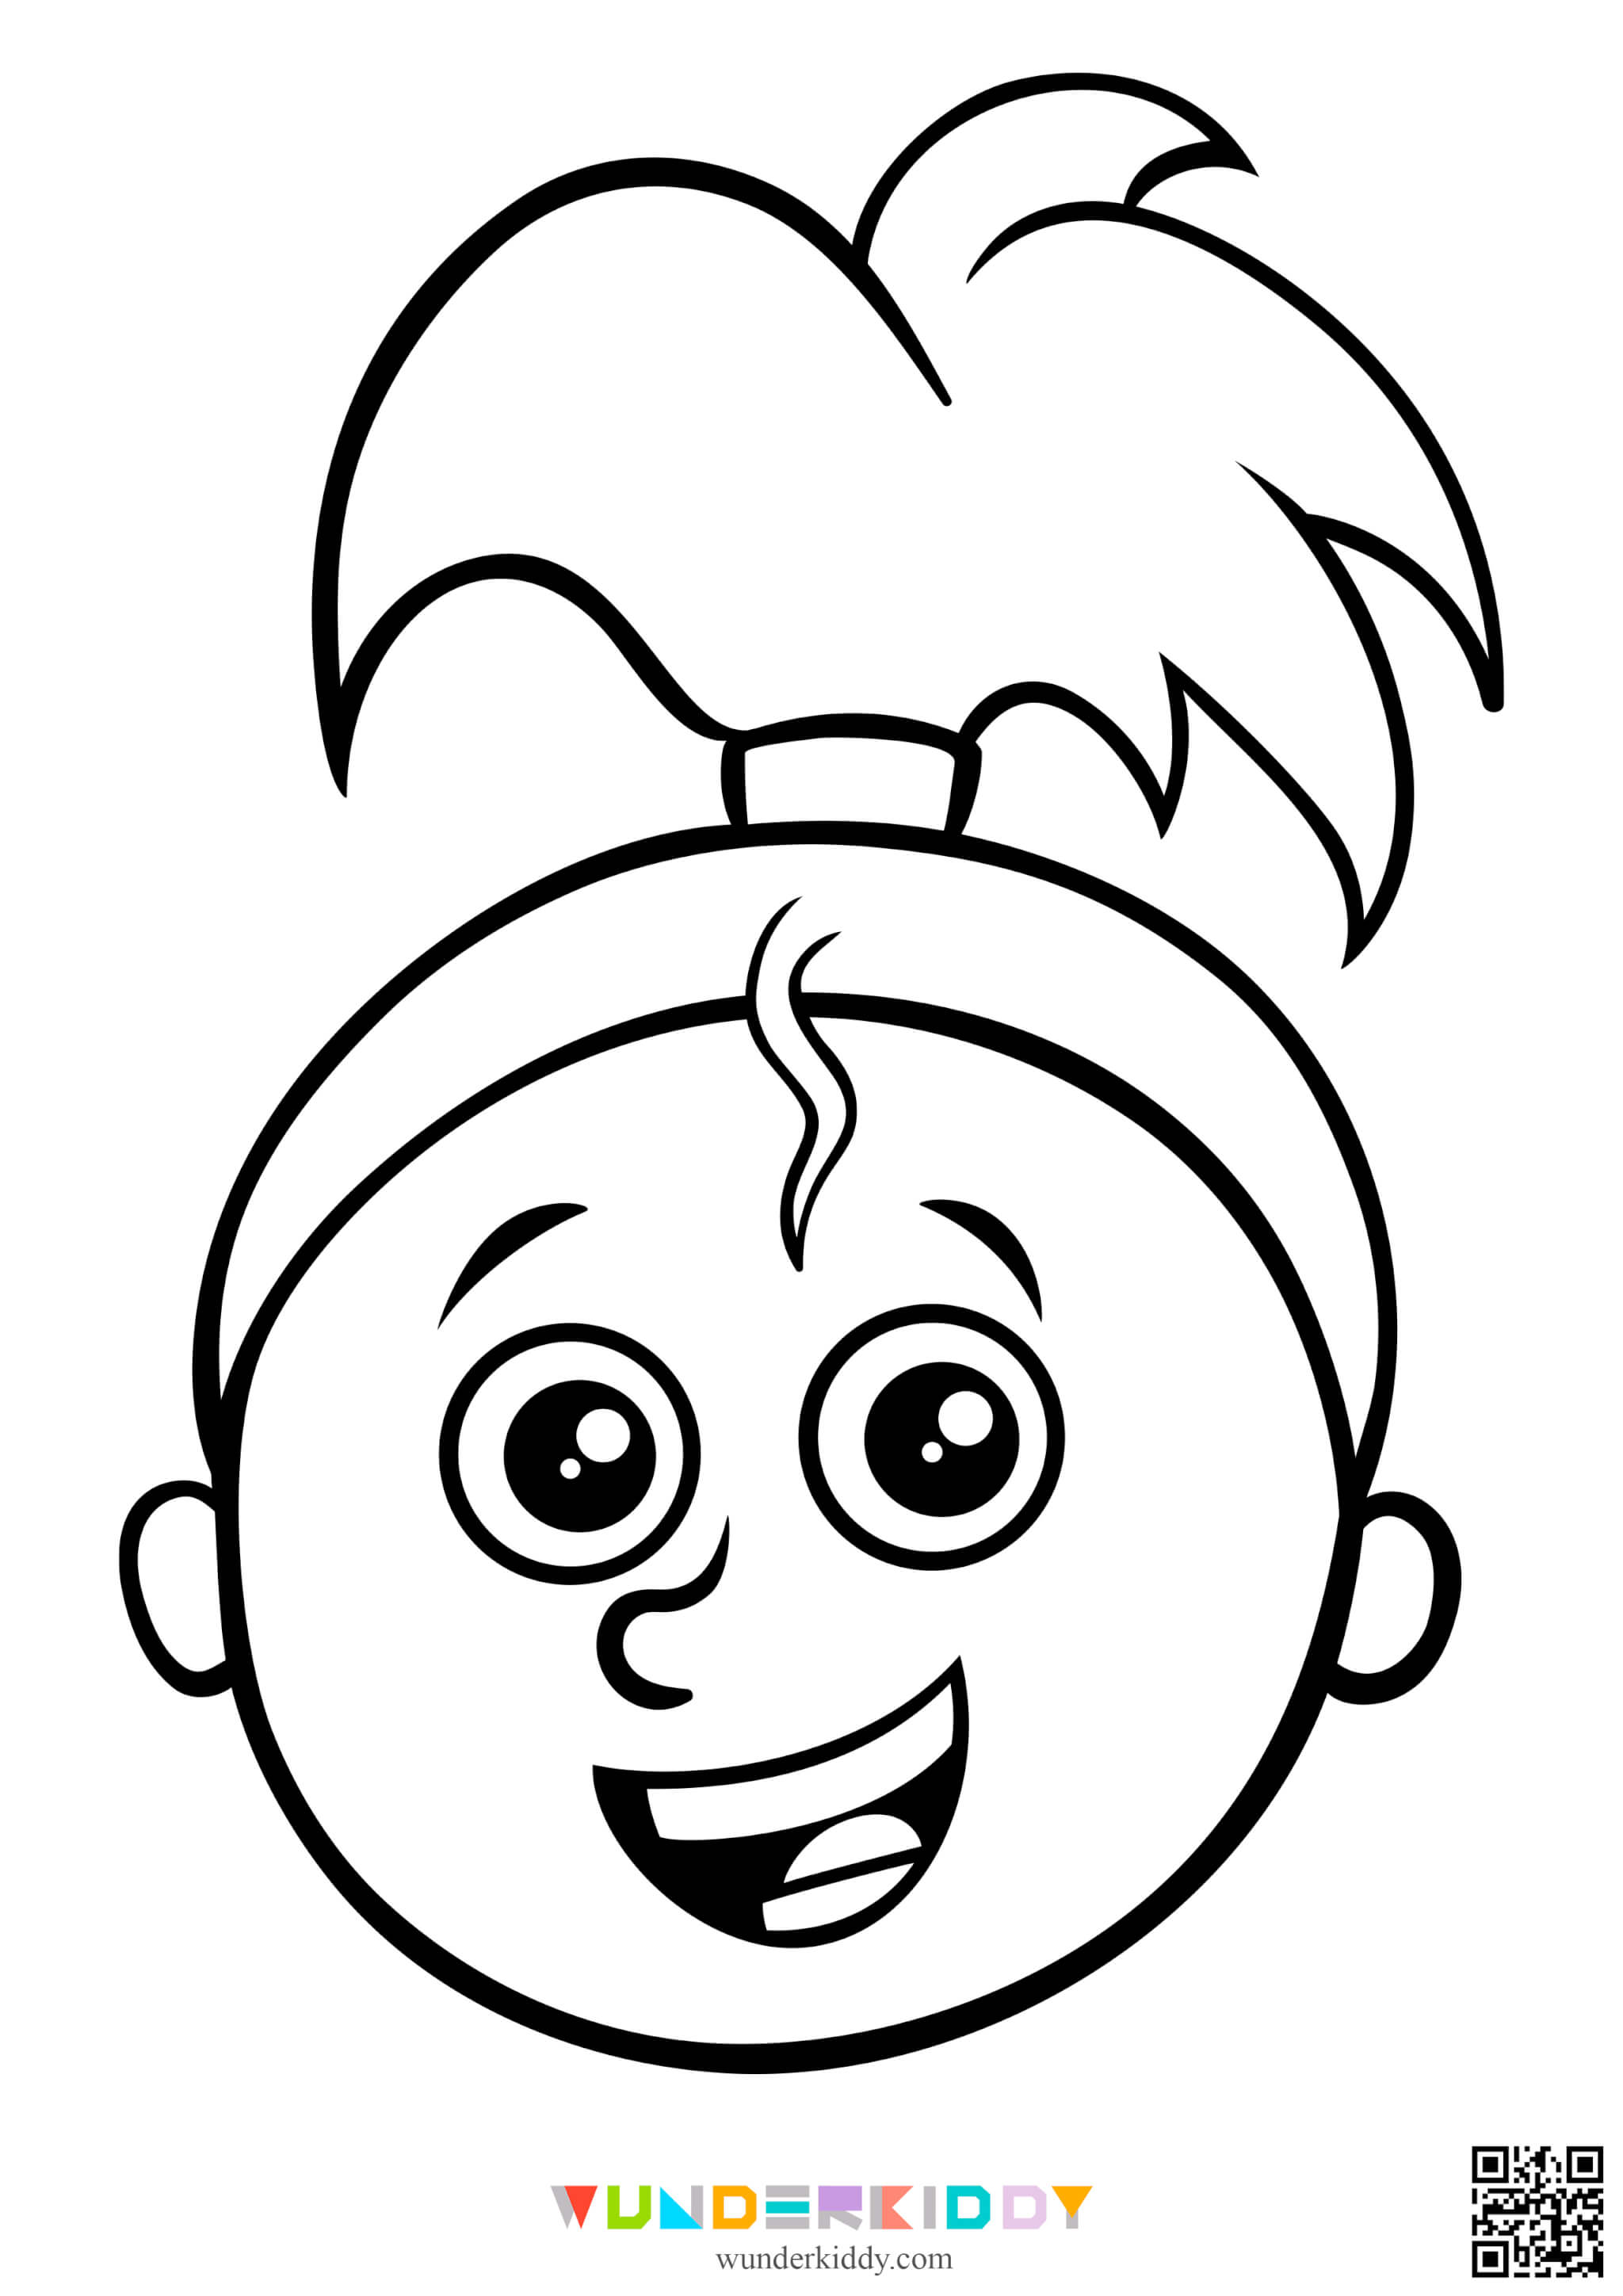 Face Coloring Page - Image 4